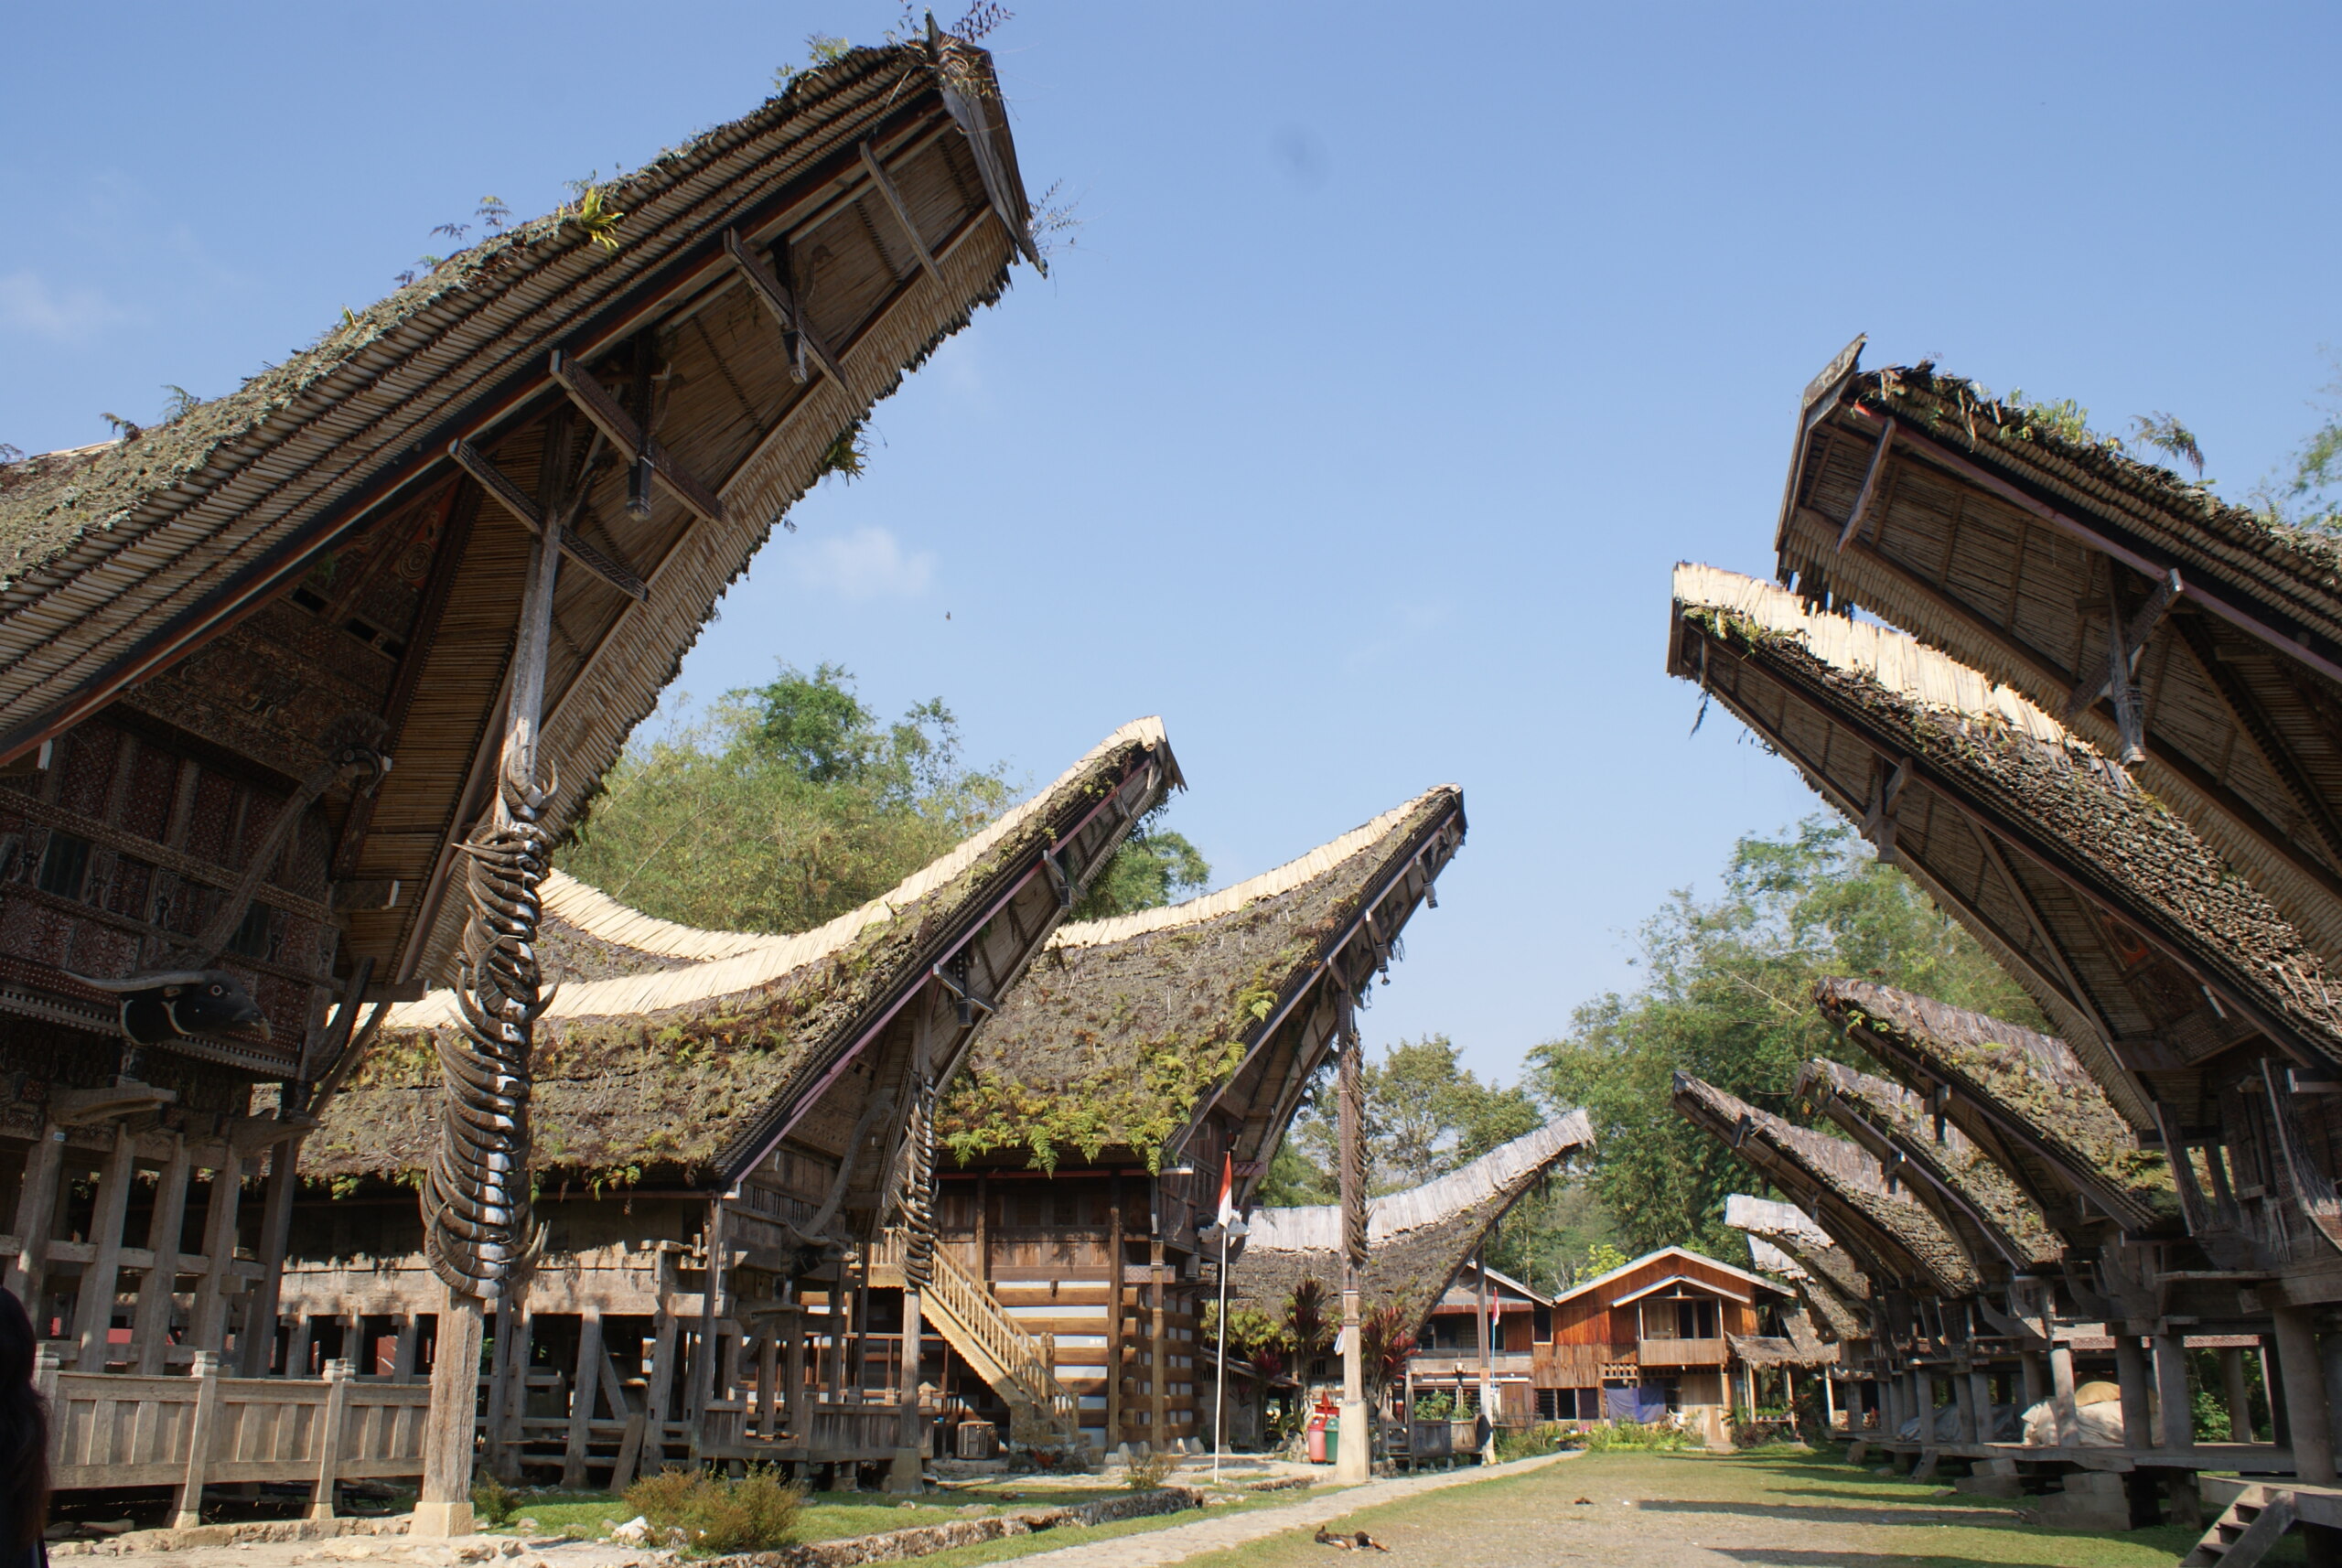 10 Styles of Architecture you will find in South-East Asia